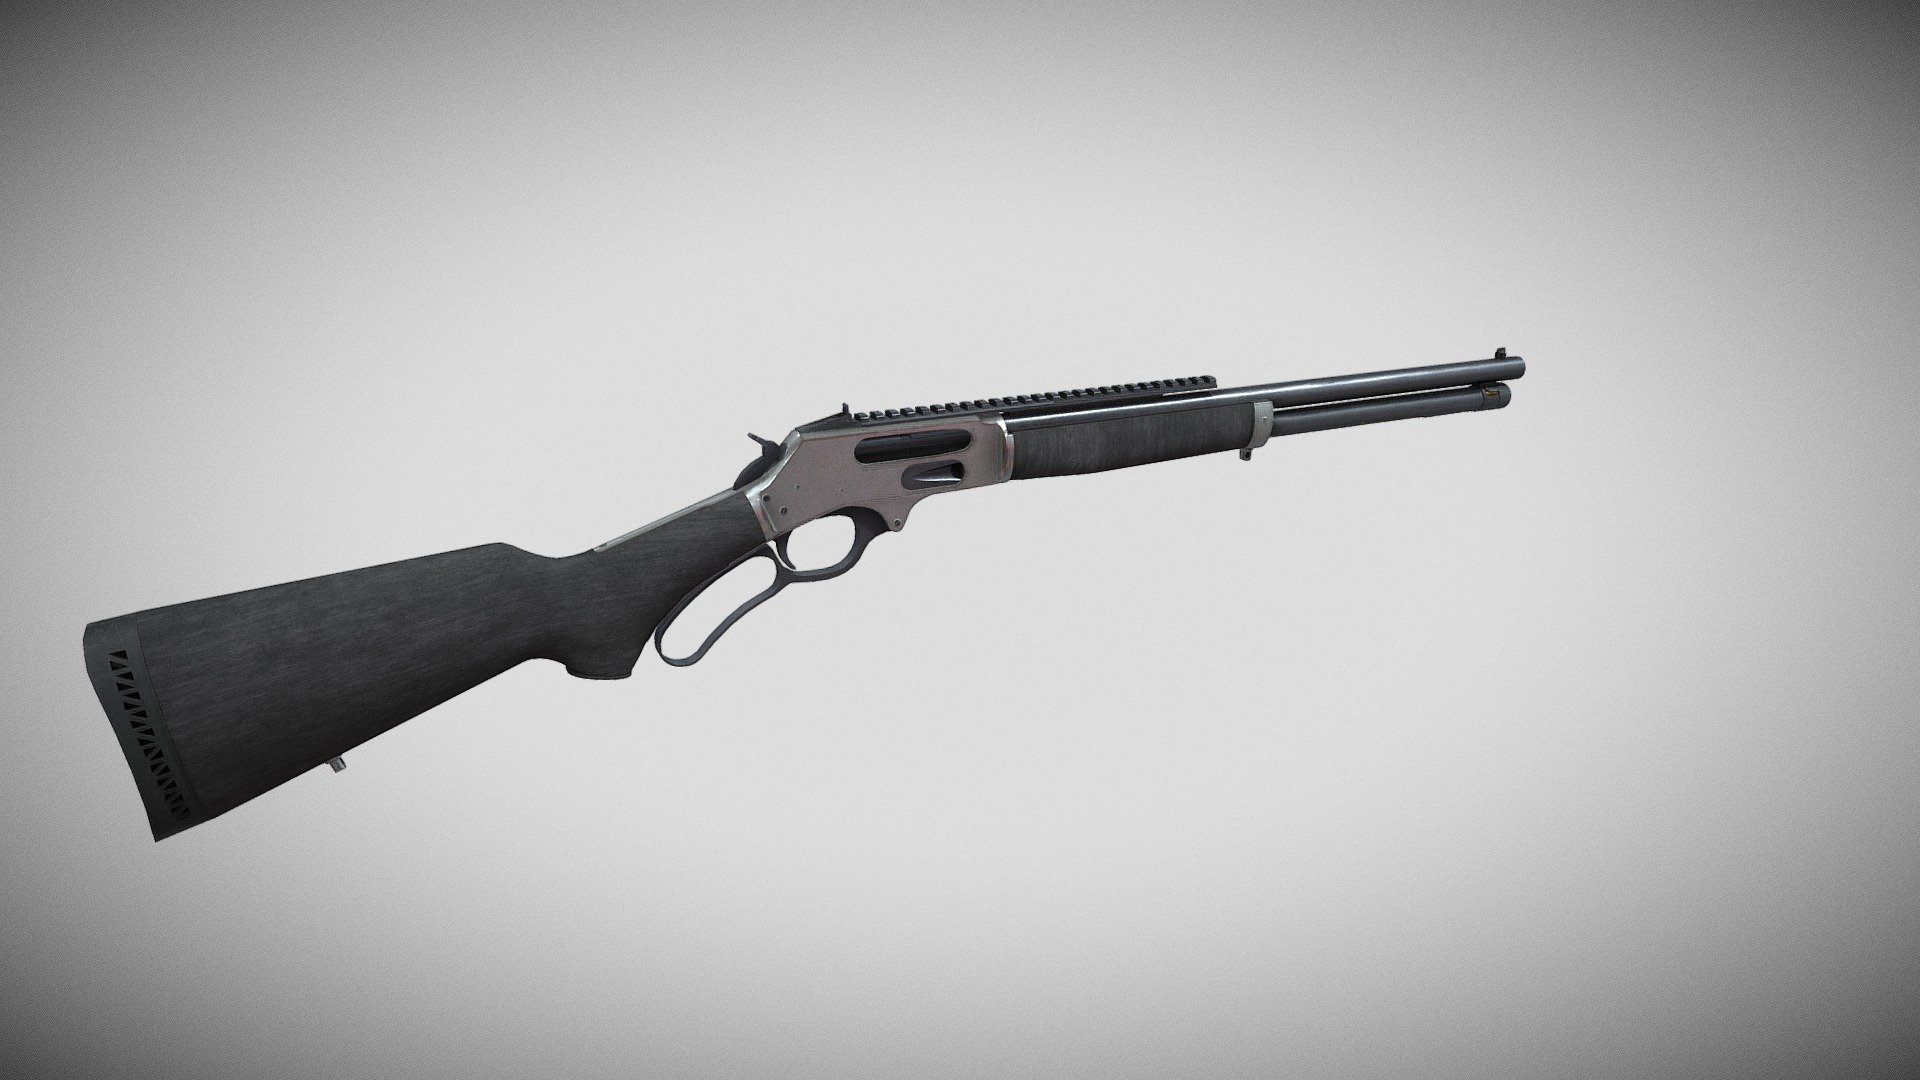 This is the Lever action rifle Marlin .45-70 3d model, originally created in Blender and rendered with Cycles. High resolution textures exported out of Substance Painter for Unreal Engine and Unity as well as default for any other possible use. Material, meshes and texture names follow an easy to understand naming convention. You can download ammo for free: https://sketchfab.com/3d-models/ammo-45-70-15250e8908a549a9aaac1327f855bcd3

Full PBR texture maps at 4K resolution: Base color Ambient Occlusion Roughness Metalness Normal

Unreal Engine: Base color Normal OcclusionRoughnessMetallic

Unity: AlbedoTransparency MetallicSmoothness Normal

Model has clean topology and geometry Textures are 4096x4096 resolution and come in PNG format - Lever action rifle - Buy Royalty Free 3D model by Korboleev Vitalii (@korboleevv) 3d model